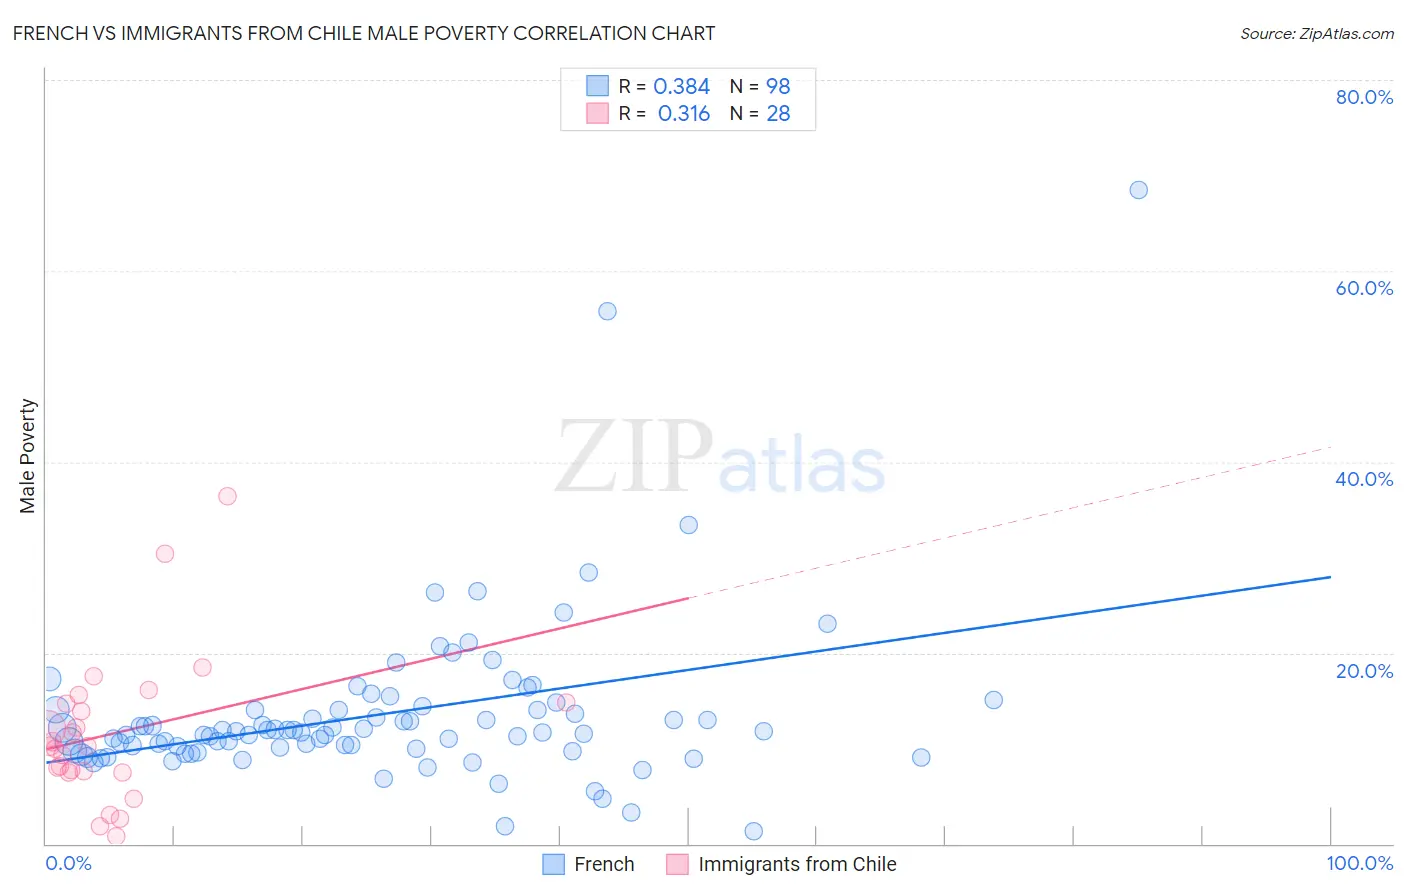 French vs Immigrants from Chile Male Poverty